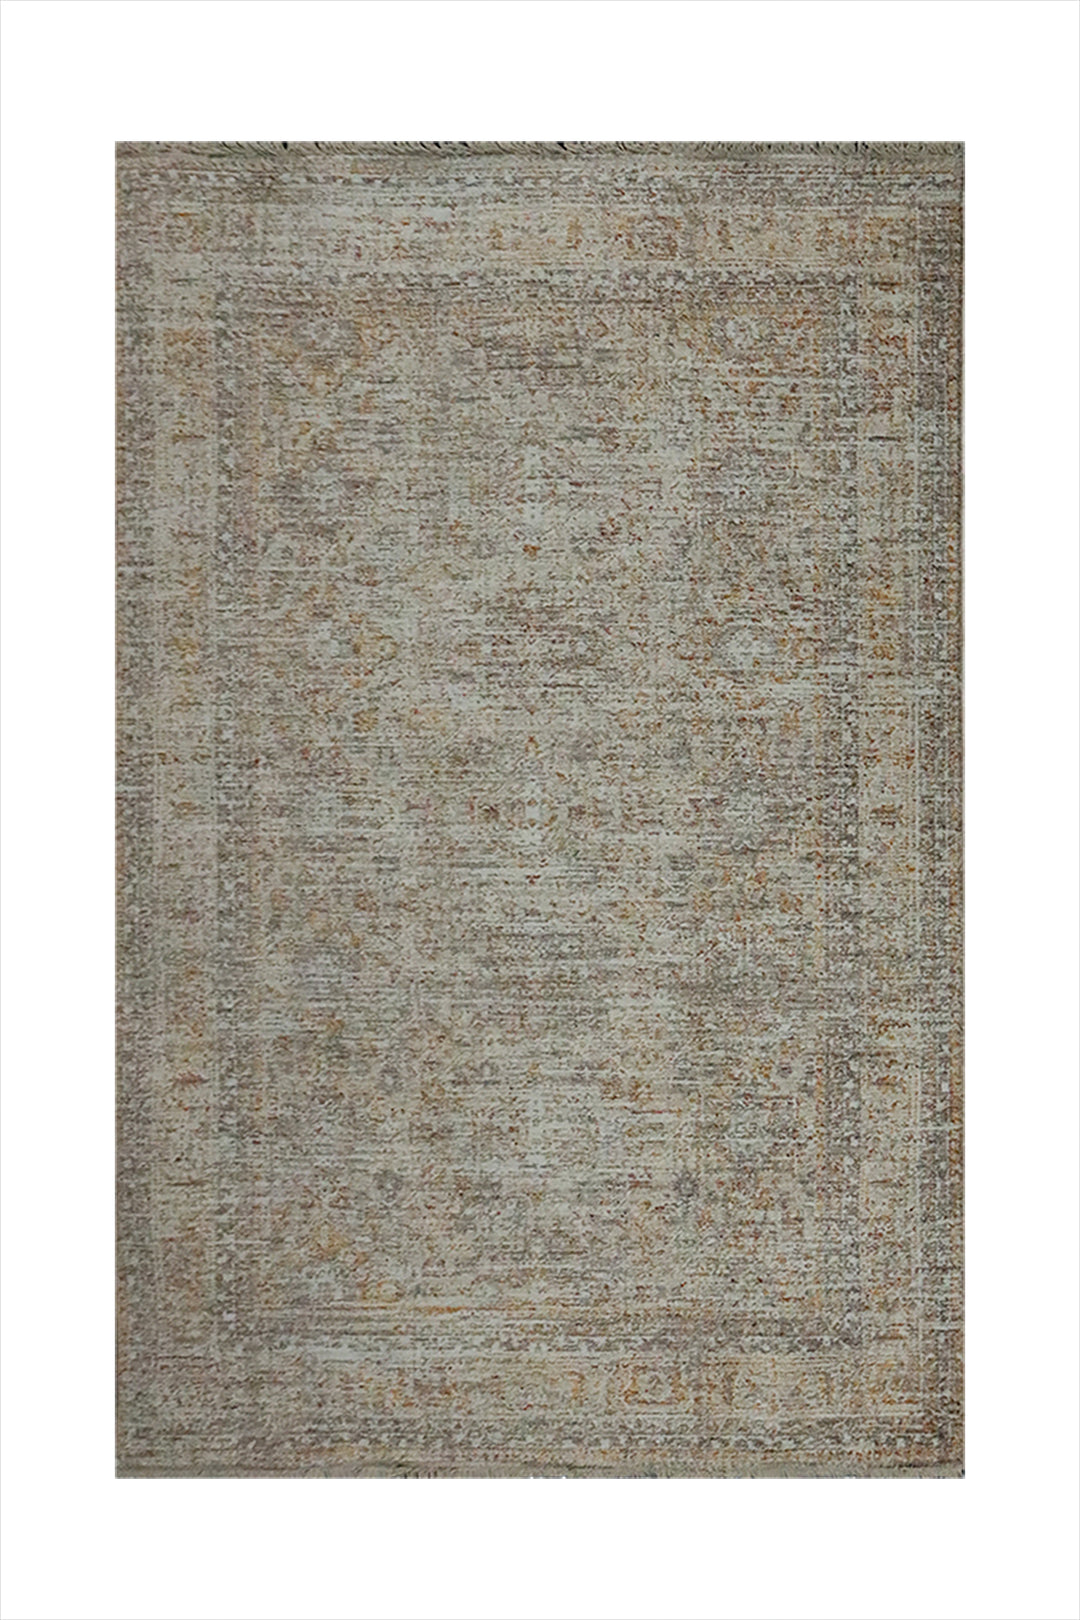 Turkish Modern  Festival Plus Rug - Brown - 3.9 x 5.5 FT - Superior Comfort, Modern Style Accent Rugs